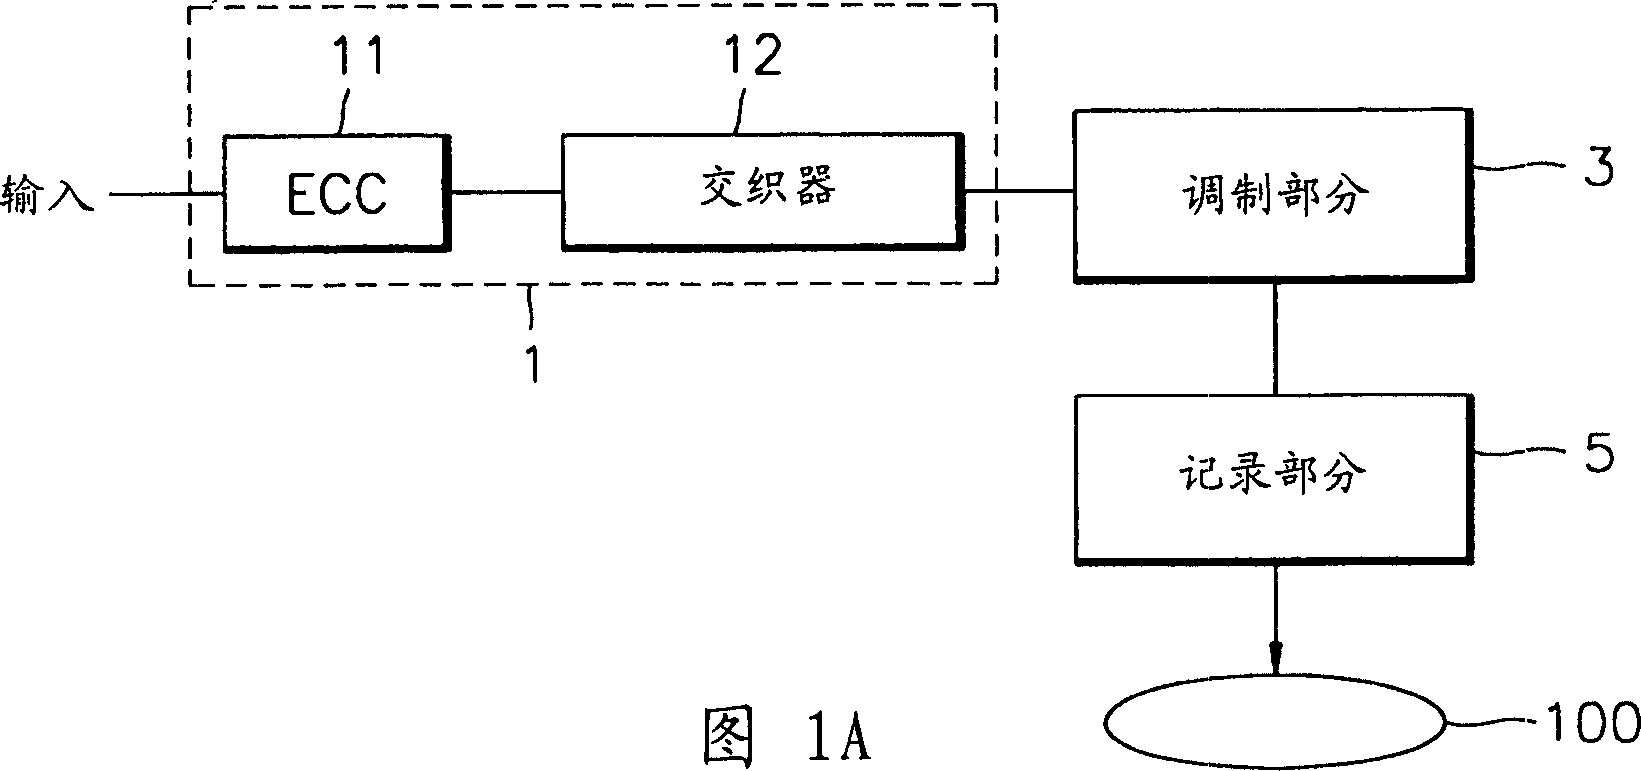 Optical recording device, data recording method used by such device